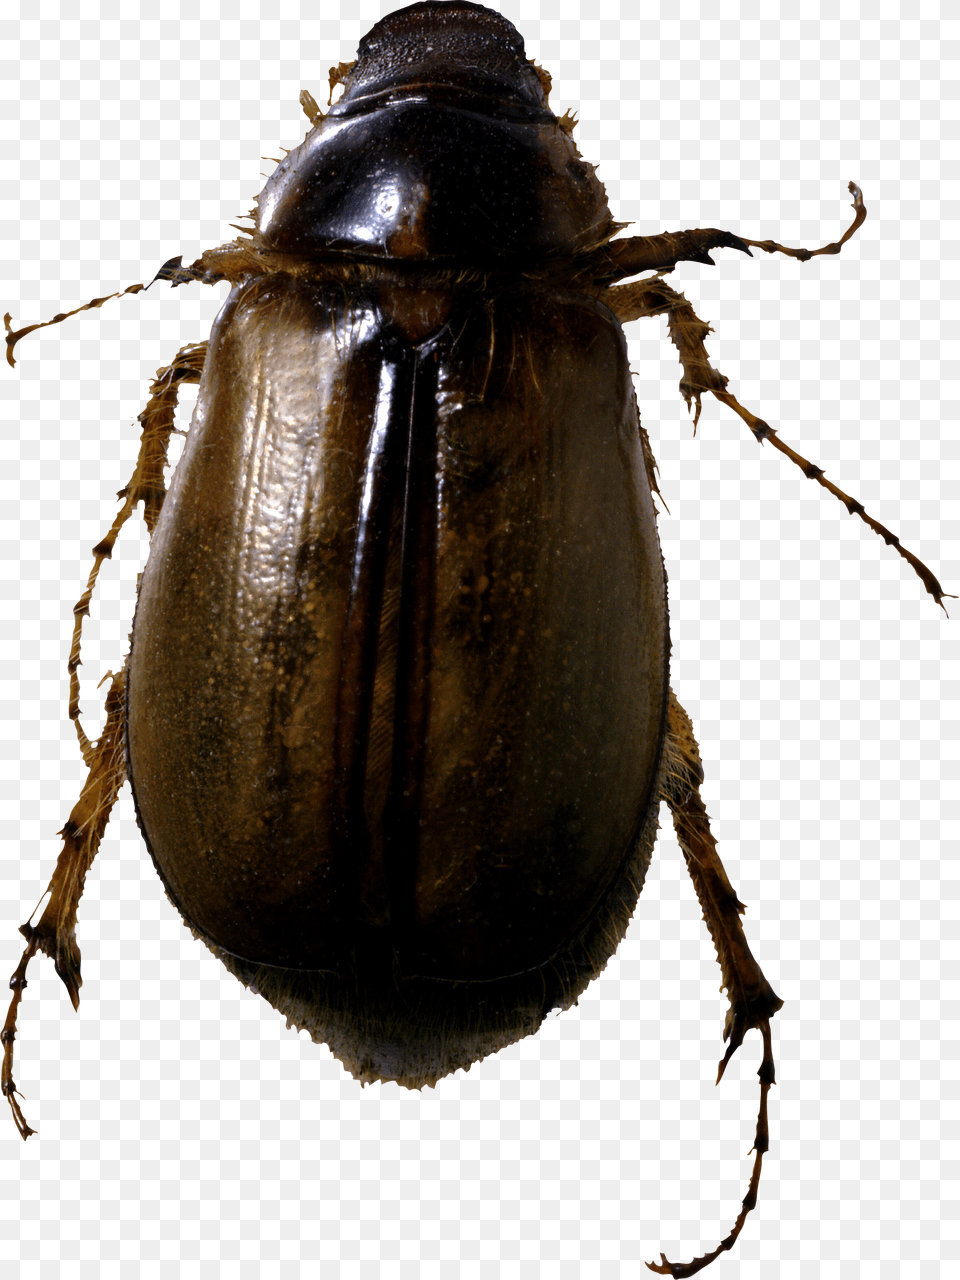 Roach Bug Image Bug, Animal, Insect, Invertebrate, Dung Beetle Free Png Download